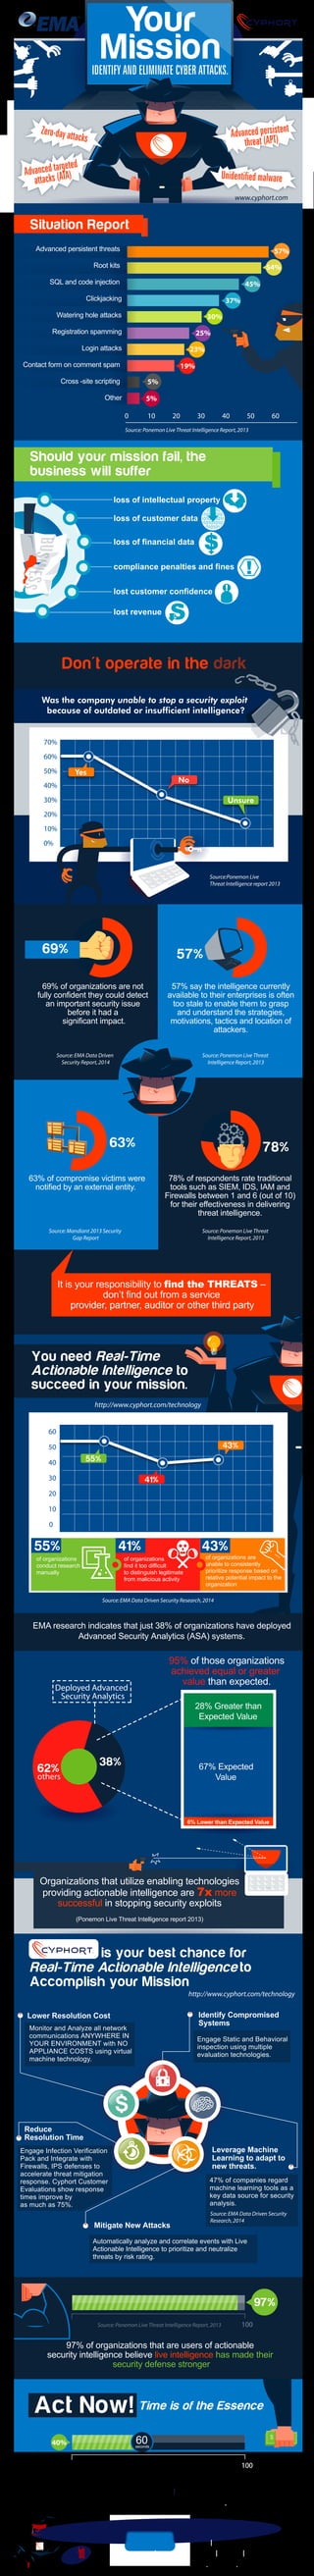 loss of intellectual property
loss of financial data
compliance penalties and fines
lost customer confidence
lost revenue
loss of customer data
70%
60%
50%
40%
30%
20%
10%
0%
Your
MissionIDENTIFY AND ELIMINATE CYBER ATTACKS.
Should your mission fail, the
business will suffer
Zero-day attacks
Advanced targeted
attacks (ATA) Unidentified malware
Advanced persistent
threat (APT)
It is your responsibility to find the THREATS –
don’t find out from a service
provider, partner, auditor or other third party
0 10 20 30 40 50 60
57%
54%
45%
37%
30%
25%
23%
19%
5%
5%
Advanced persistent threats
Root kits
SQL and code injection
Clickjacking
Watering hole attacks
Registration spamming
Login attacks
Contact form on comment spam
Cross -site scripting
Other
Situation Report
Source:Ponemon Live Threat Intelligence Report,2013
Source:Ponemon Live
Threat Intelligence report 2013
78% of respondents rate traditional
tools such as SIEM, IDS, IAM and
Firewalls between 1 and 6 (out of 10)
for their effectiveness in delivering
threat intelligence.
78%
57% say the intelligence currently
available to their enterprises is often
too stale to enable them to grasp
and understand the strategies,
motivations, tactics and location of
attackers.
57%
69% of organizations are not
fully confident they could detect
an important security issue
before it had a
significant impact.
69%
Don't operate in the dark
63% of compromise victims were
notified by an external entity.
63%
You need Real-Time
Actionable Intelligence to
succeed in your mission.
EMA research indicates that just 38% of organizations have deployed
Advanced Security Analytics (ASA) systems.
of organizations
conduct research
manually
of organizations
find it too difficult
to distinguish legitimate
from malicious activity
of organizations are
unable to consistently
prioritize response based on
relative potential impact to the
organization
55% 41%
41%
55%
43%
43%
0
10
20
30
40
50
60
Organizations that utilize enabling technologies
providing actionable intelligence are 7x more
successful in stopping security exploits
(Ponemon Live Threat Intelligence report 2013)
Lower Resolution Cost
Leverage Machine
Learning to adapt to
new threats.
Mitigate New Attacks
97% of organizations that are users of actionable
security intelligence believe live intelligence has made their
security defense stronger
100Source:Ponemon Live Threat Intelligence Report,2013
Action within 60 seconds of an incident
can reduce the resolution cost of a
breach by an average of 40%.
100
40%
Source:Ponemon Live Threat Intelligence Report,2013
60seconds
$
Engage Infection Verification
Pack and Integrate with
Firewalls, IPS defenses to
accelerate threat mitigation
response. Cyphort Customer
Evaluations show response
times improve by
as much as 75%.
47% of companies regard
machine learning tools as a
key data source for security
analysis.
Engage Static and Behavioral
inspection using multiple
evaluation technologies.
Monitor and Analyze all network
communications ANYWHERE IN
YOUR ENVIRONMENT with NO
APPLIANCE COSTS using virtual
machine technology.
Automatically analyze and correlate events with Live
Actionable Intelligence to prioritize and neutralize
threats by risk rating.
Reduce
Resolution Time
www.cyphort.com
Was the company unable to stop a security exploit
because of outdated or insufficient intelligence?
Yes
No
Unsure
Source:EMA Data Driven
Security Report,2014
Source:Mandiant 2013 Security
Gap Report
Source:Ponemon Live Threat
Intelligence Report,2013
http://www.cyphort.com/technology
http://www.cyphort.com/technology
is your best chance for
to
Accomplish your Mission
Source:EMA Data Driven Security
Research,2014
97%
Time is of the EssenceAct Now!
Real-Time
Actionable Intelligence
Real-Time Actionable Intelligence
Source:EMA Data Driven Security Research,2014
Contact to get a glimpse of our
detection technology with free online malware
scanning service at http://www.cyphort.com/infographic
38%
62%
others
28% Greater than
Expected Value
67% Expected
Value
95% of those organizations
achieved equal or greater
value than expected.
Deployed Advanced
Security Analytics
6% Lower than Expected Value
Identify Compromised
Systems
Source:Ponemon Live Threat
Intelligence Report,2013
 